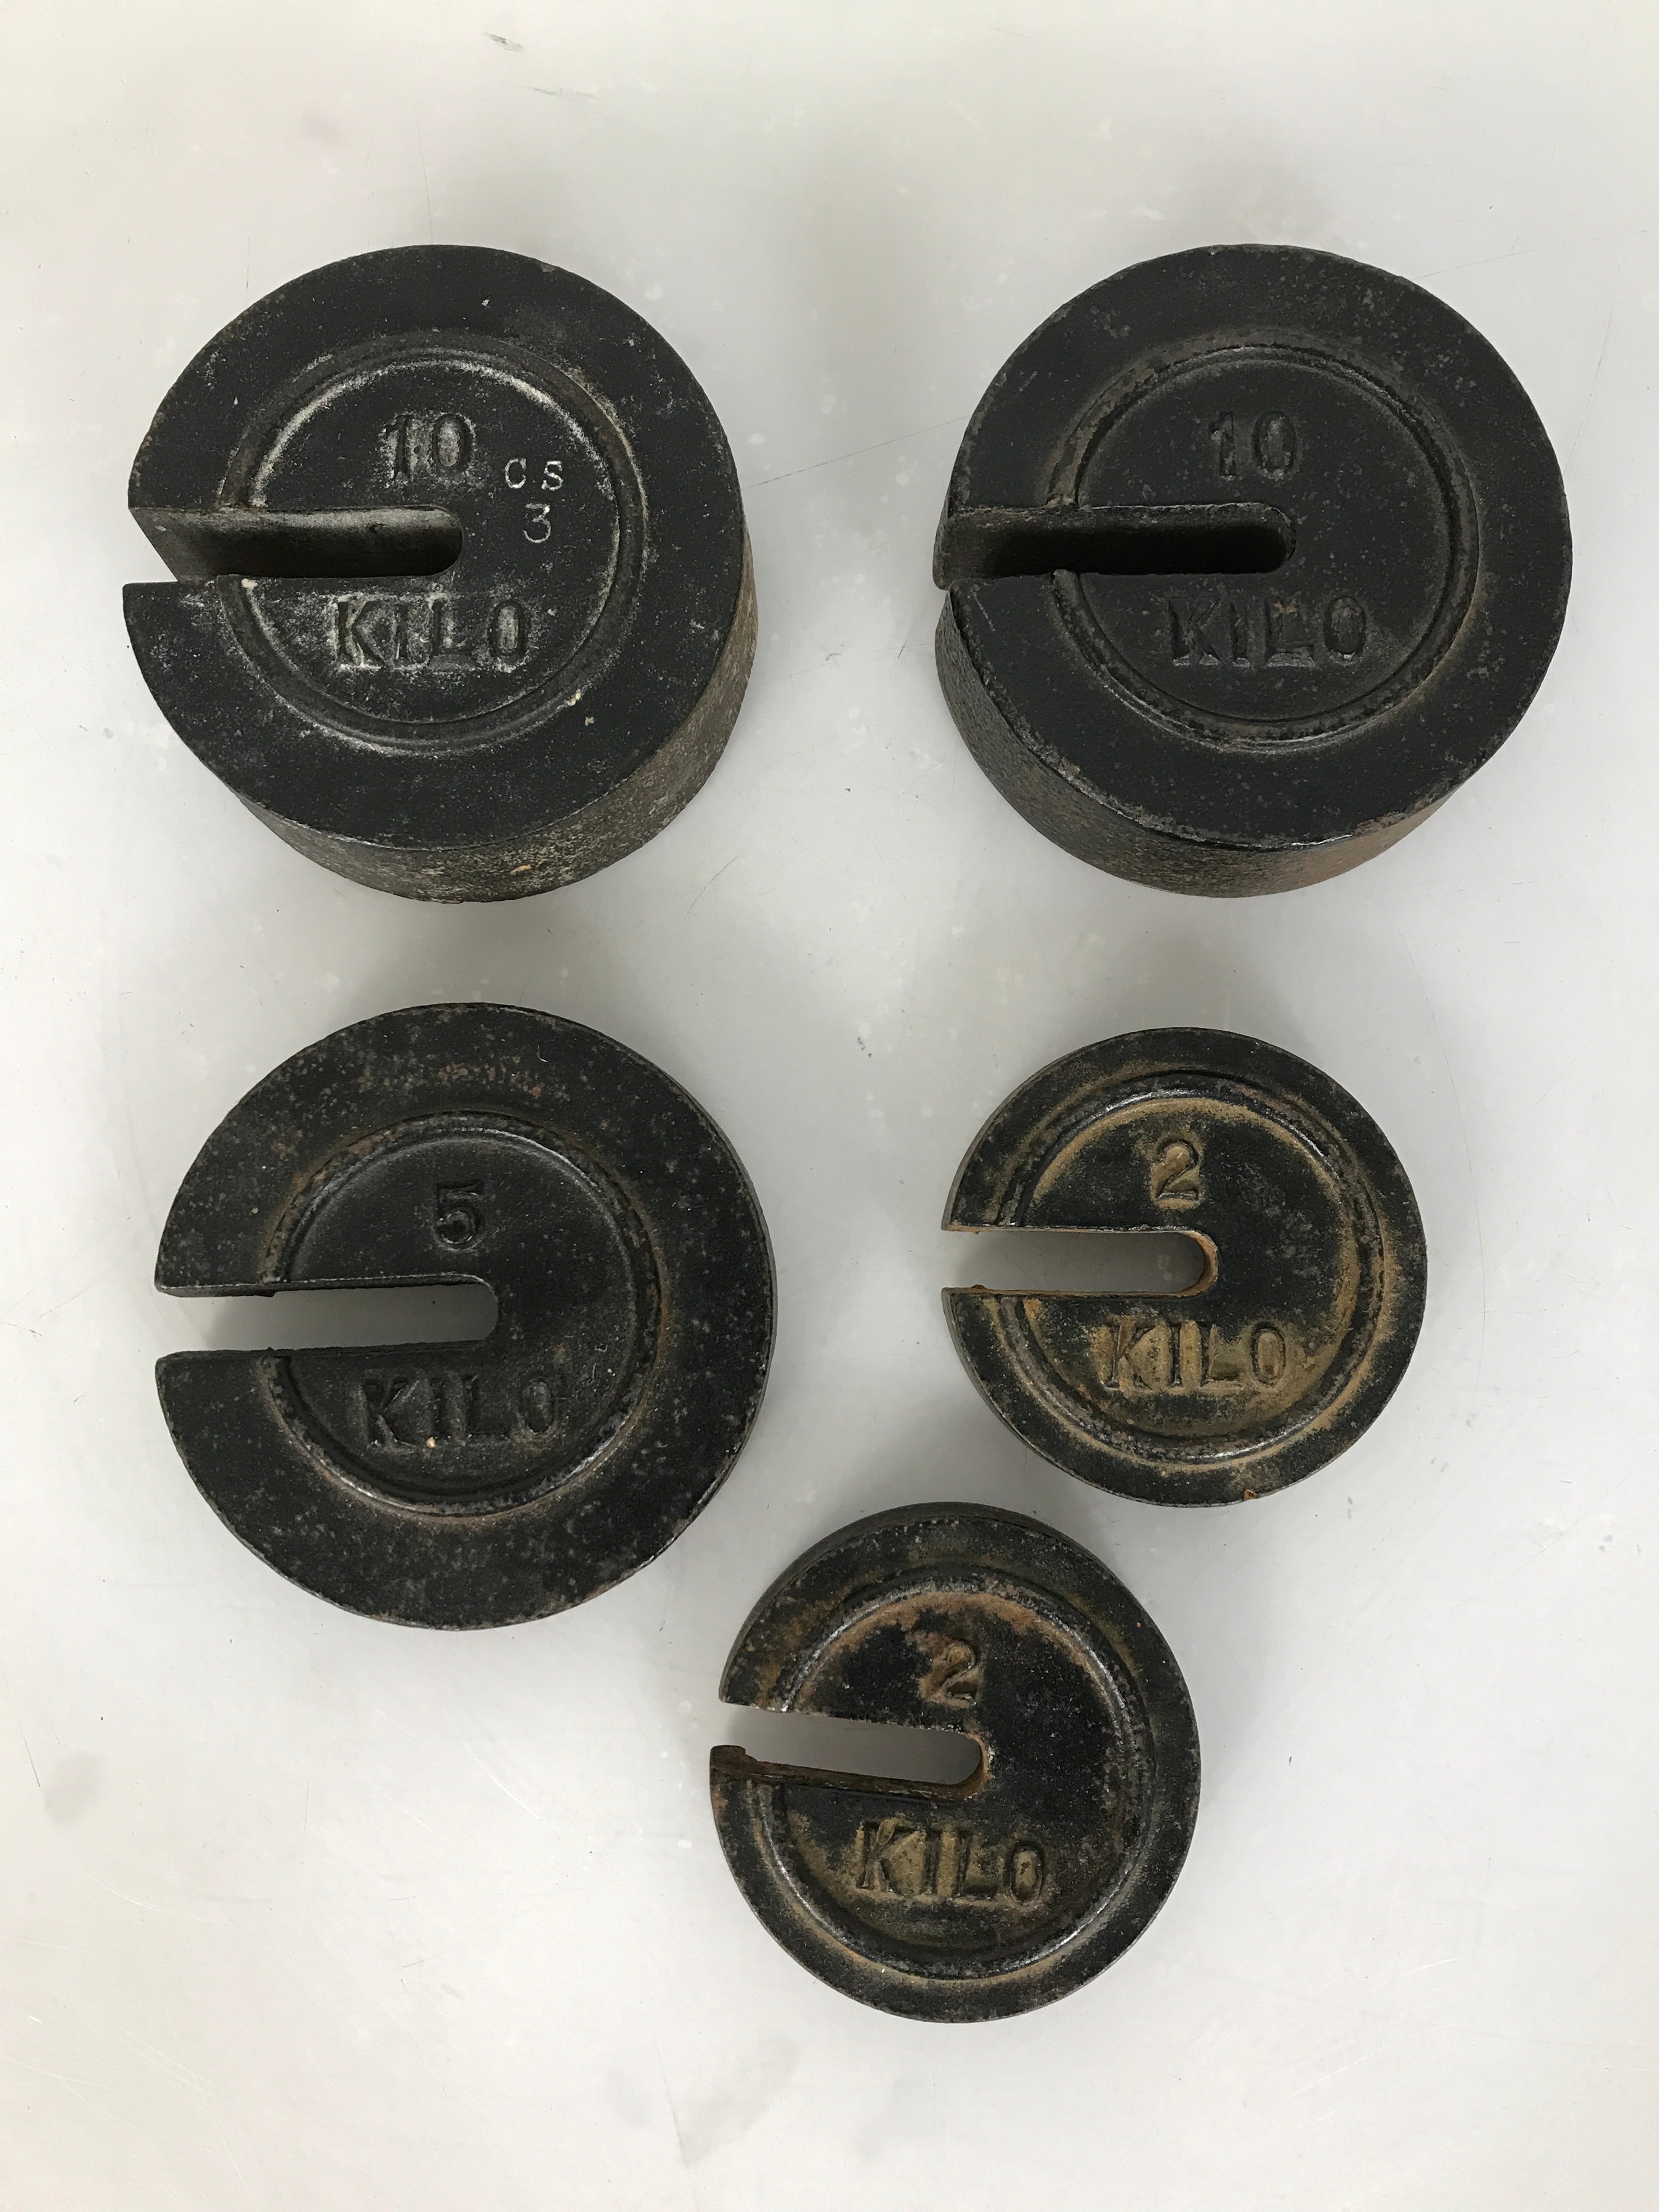 Lot of 5 Round Cast Iron Hanging Scale Platform Weights Slotted 29 Kilos